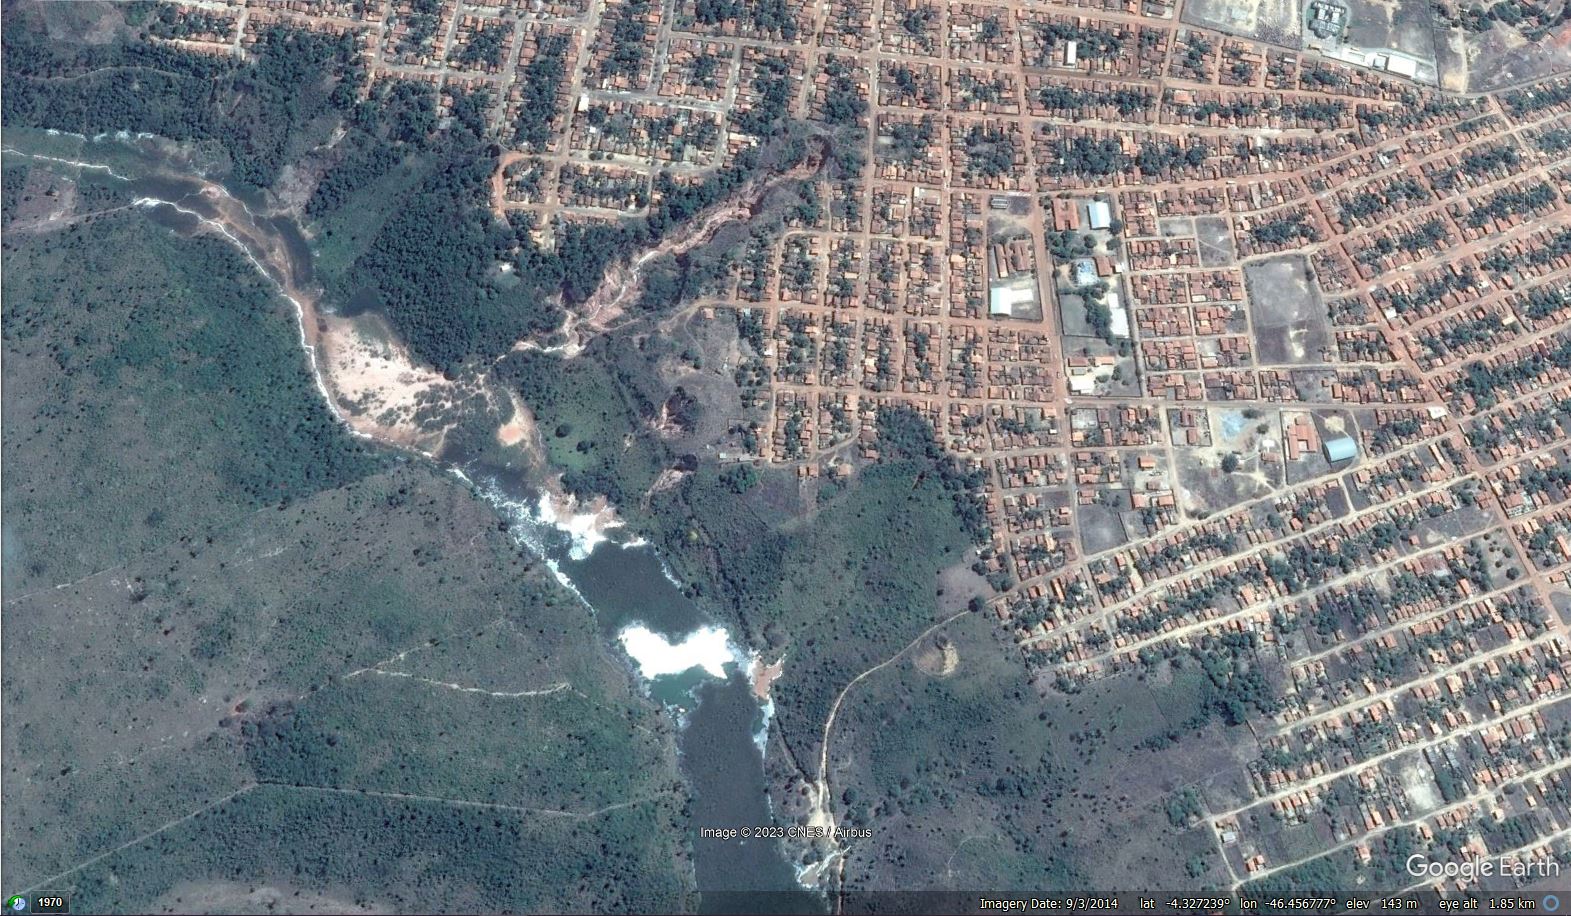 Google Earth imagery of the site of some of the landslide problems at Buriticupu in Brazil. Image from 2014.